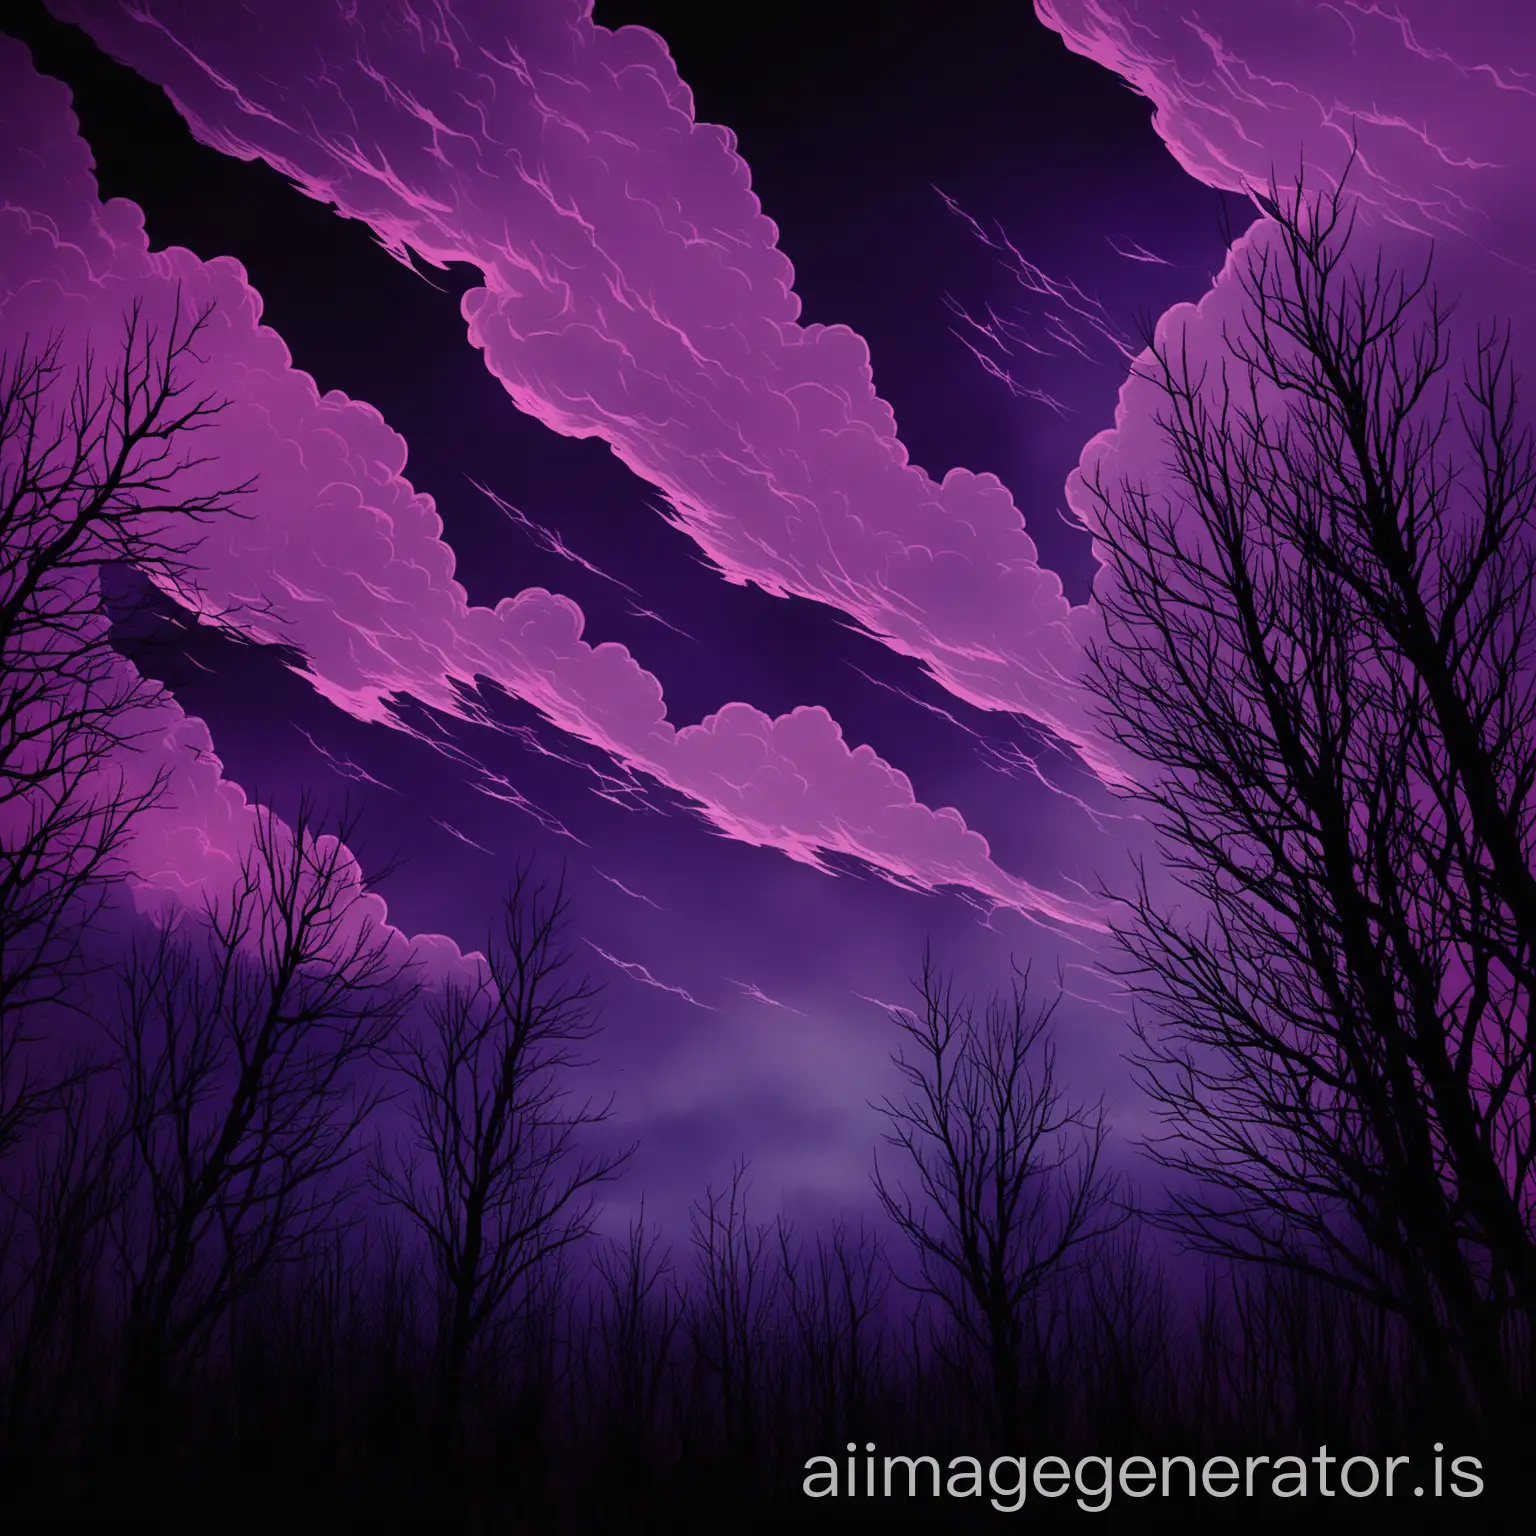 a sky with haunting treas with a 80's look